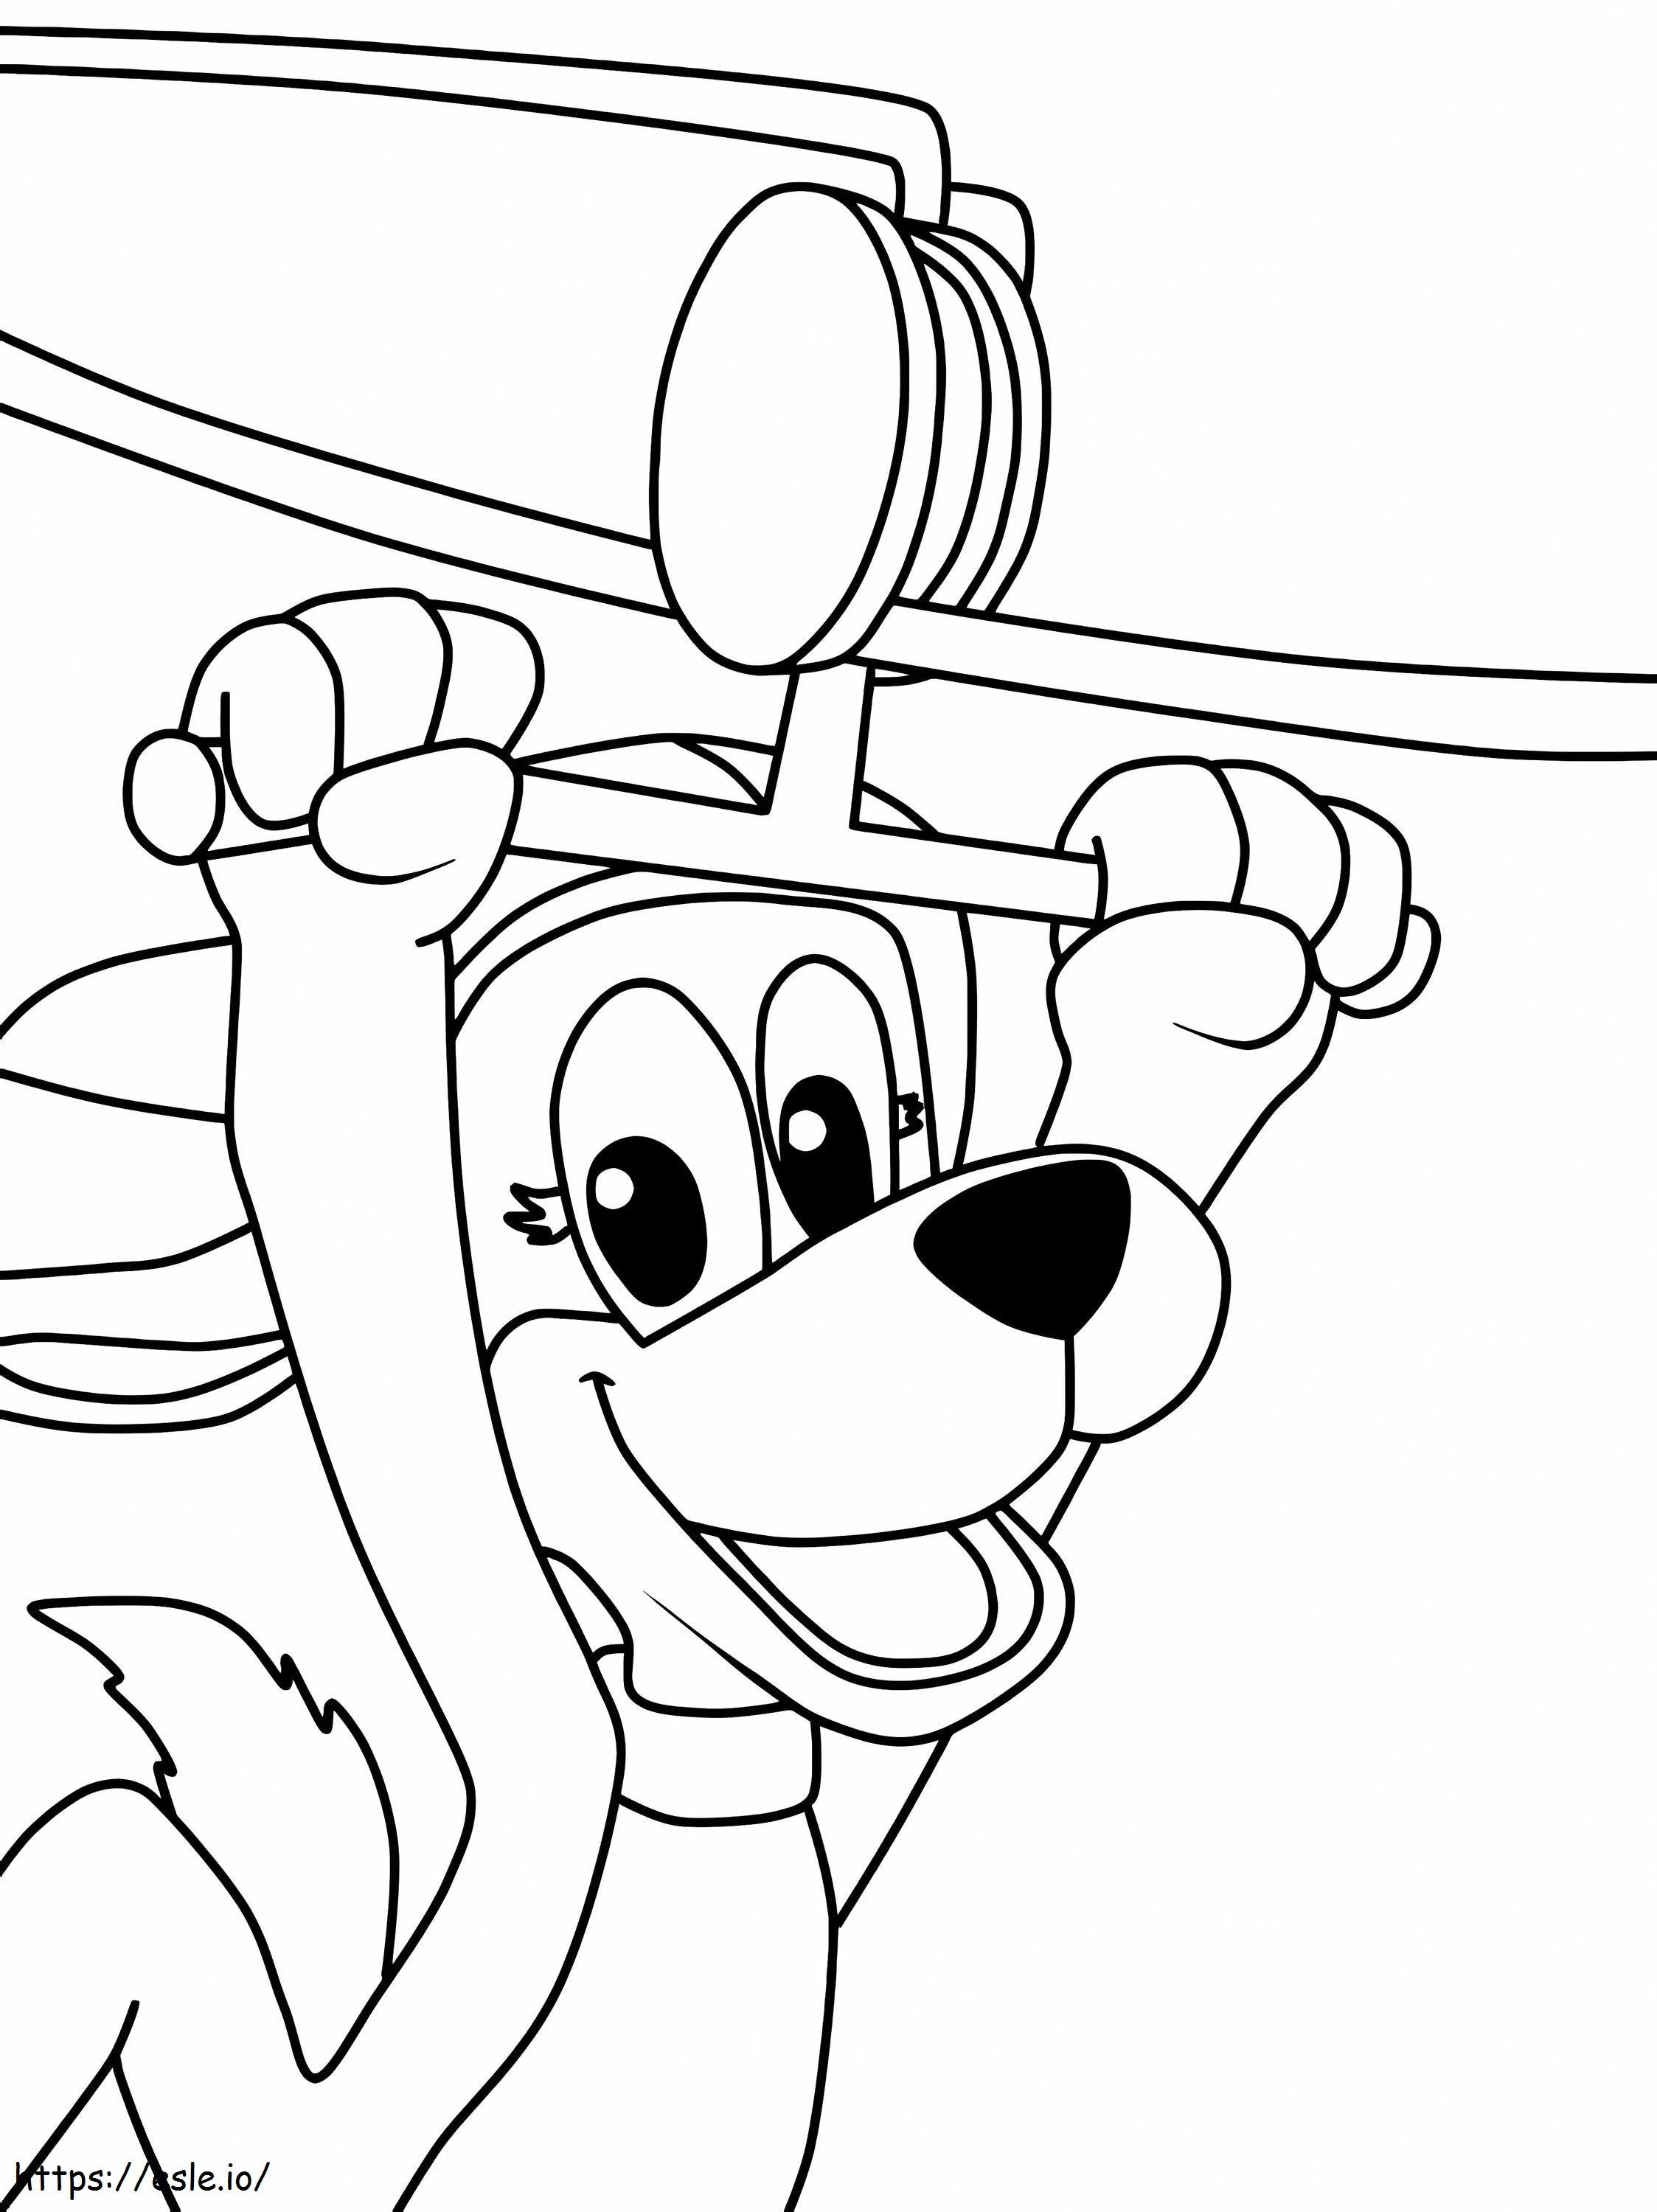 Day Barker coloring page